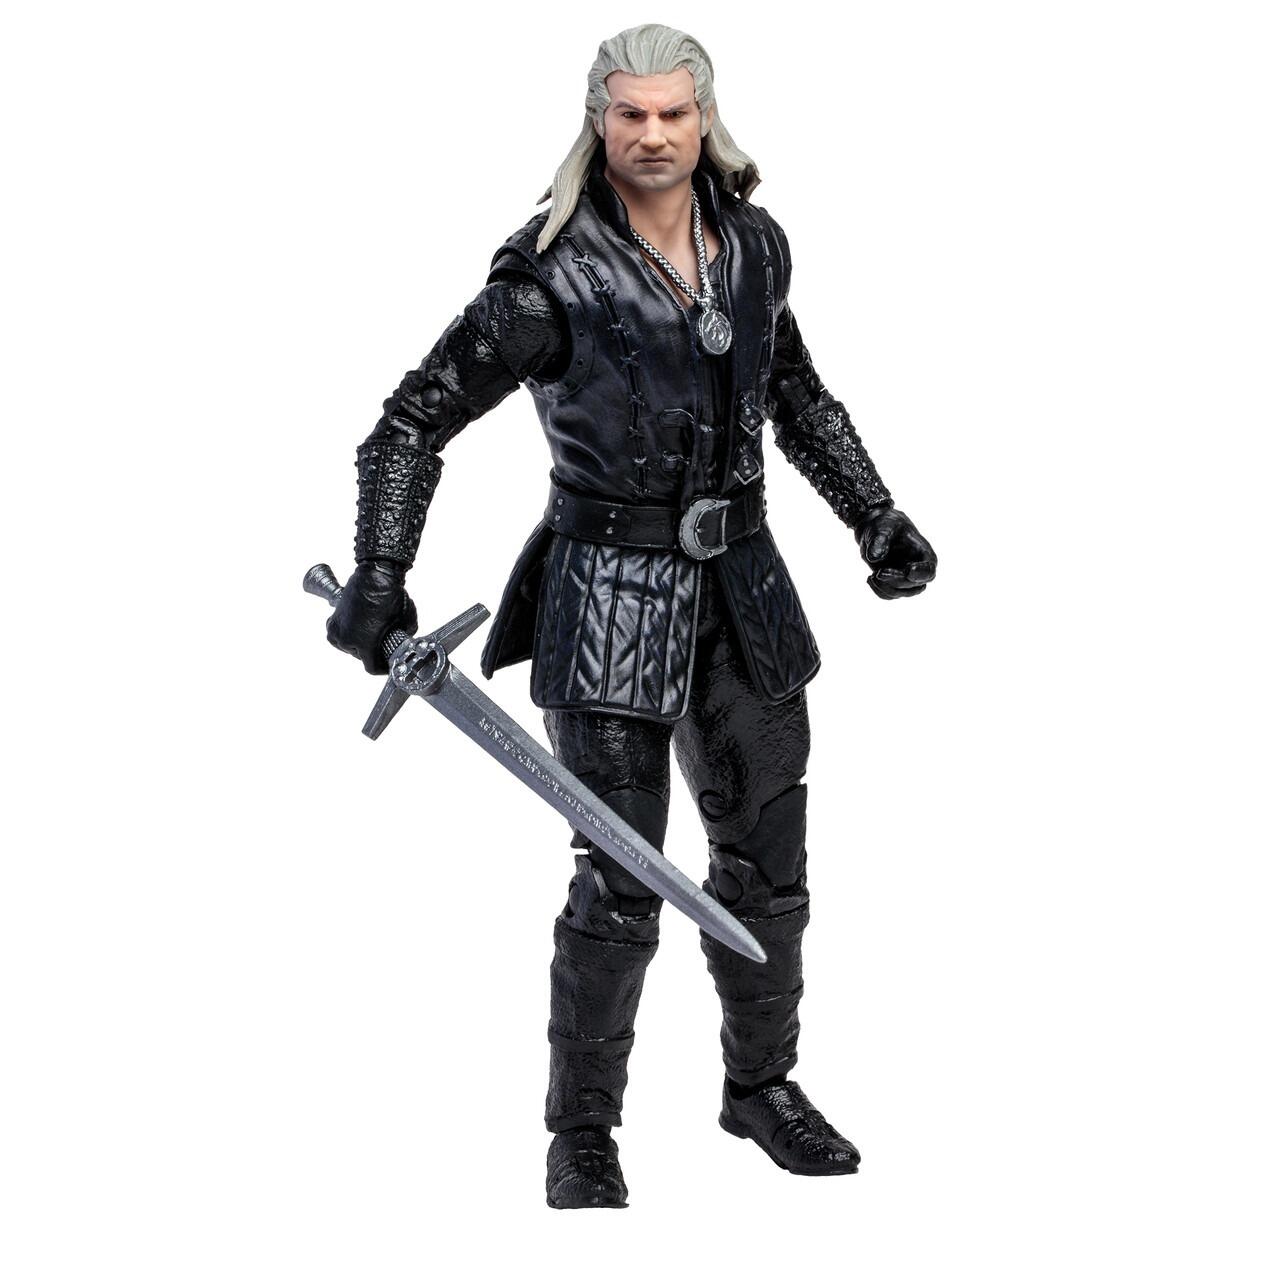 The Witcher Netflix 7 Inch Action Figure 2-Pack - Geralt and Ciri (Season 3)